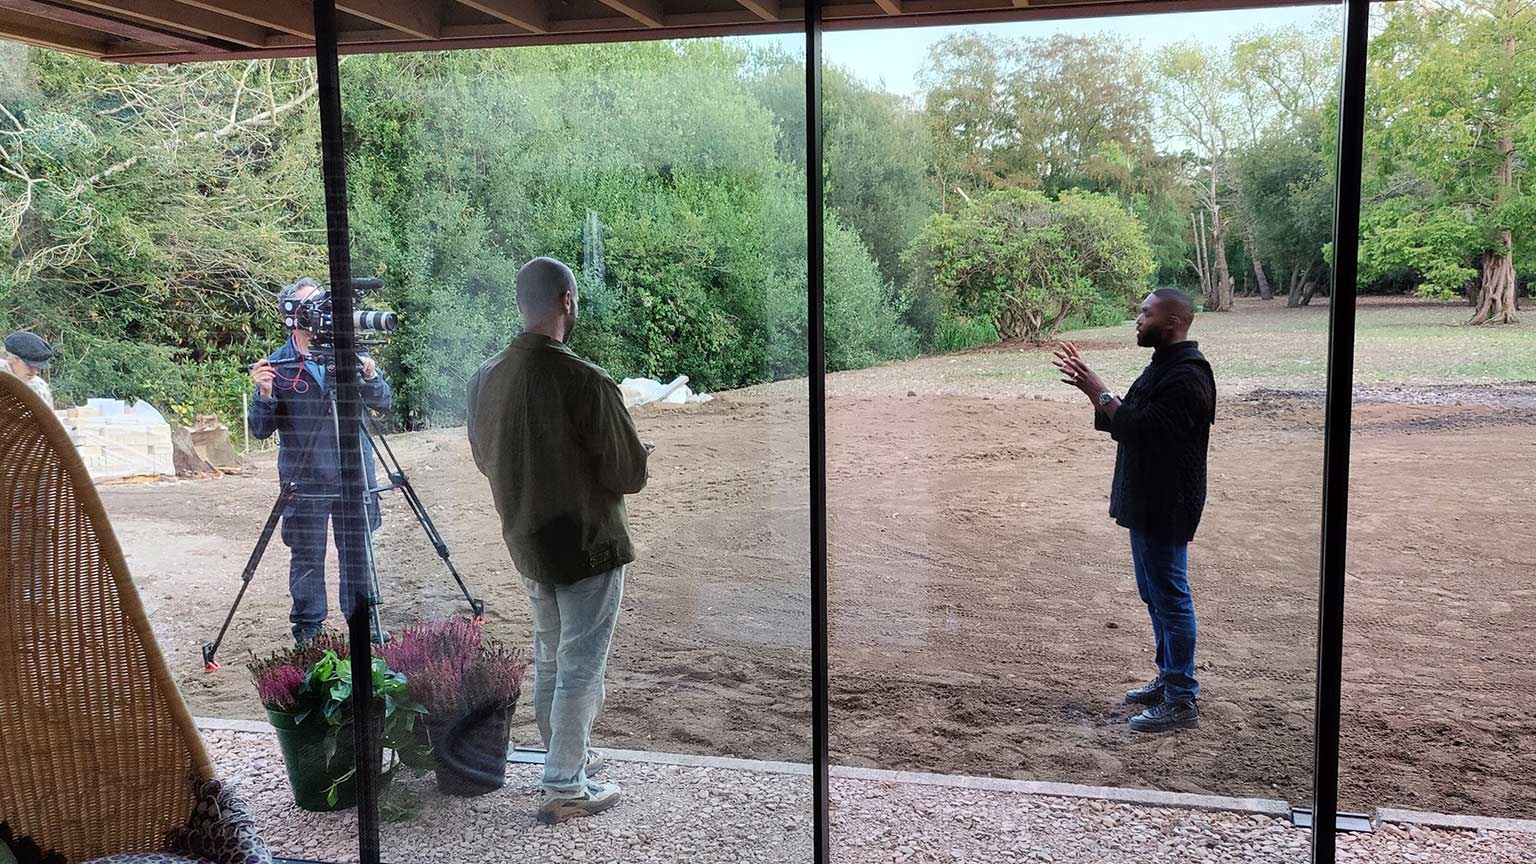 musician Tinie Tempah on site filming for tv show in front of large glass windows